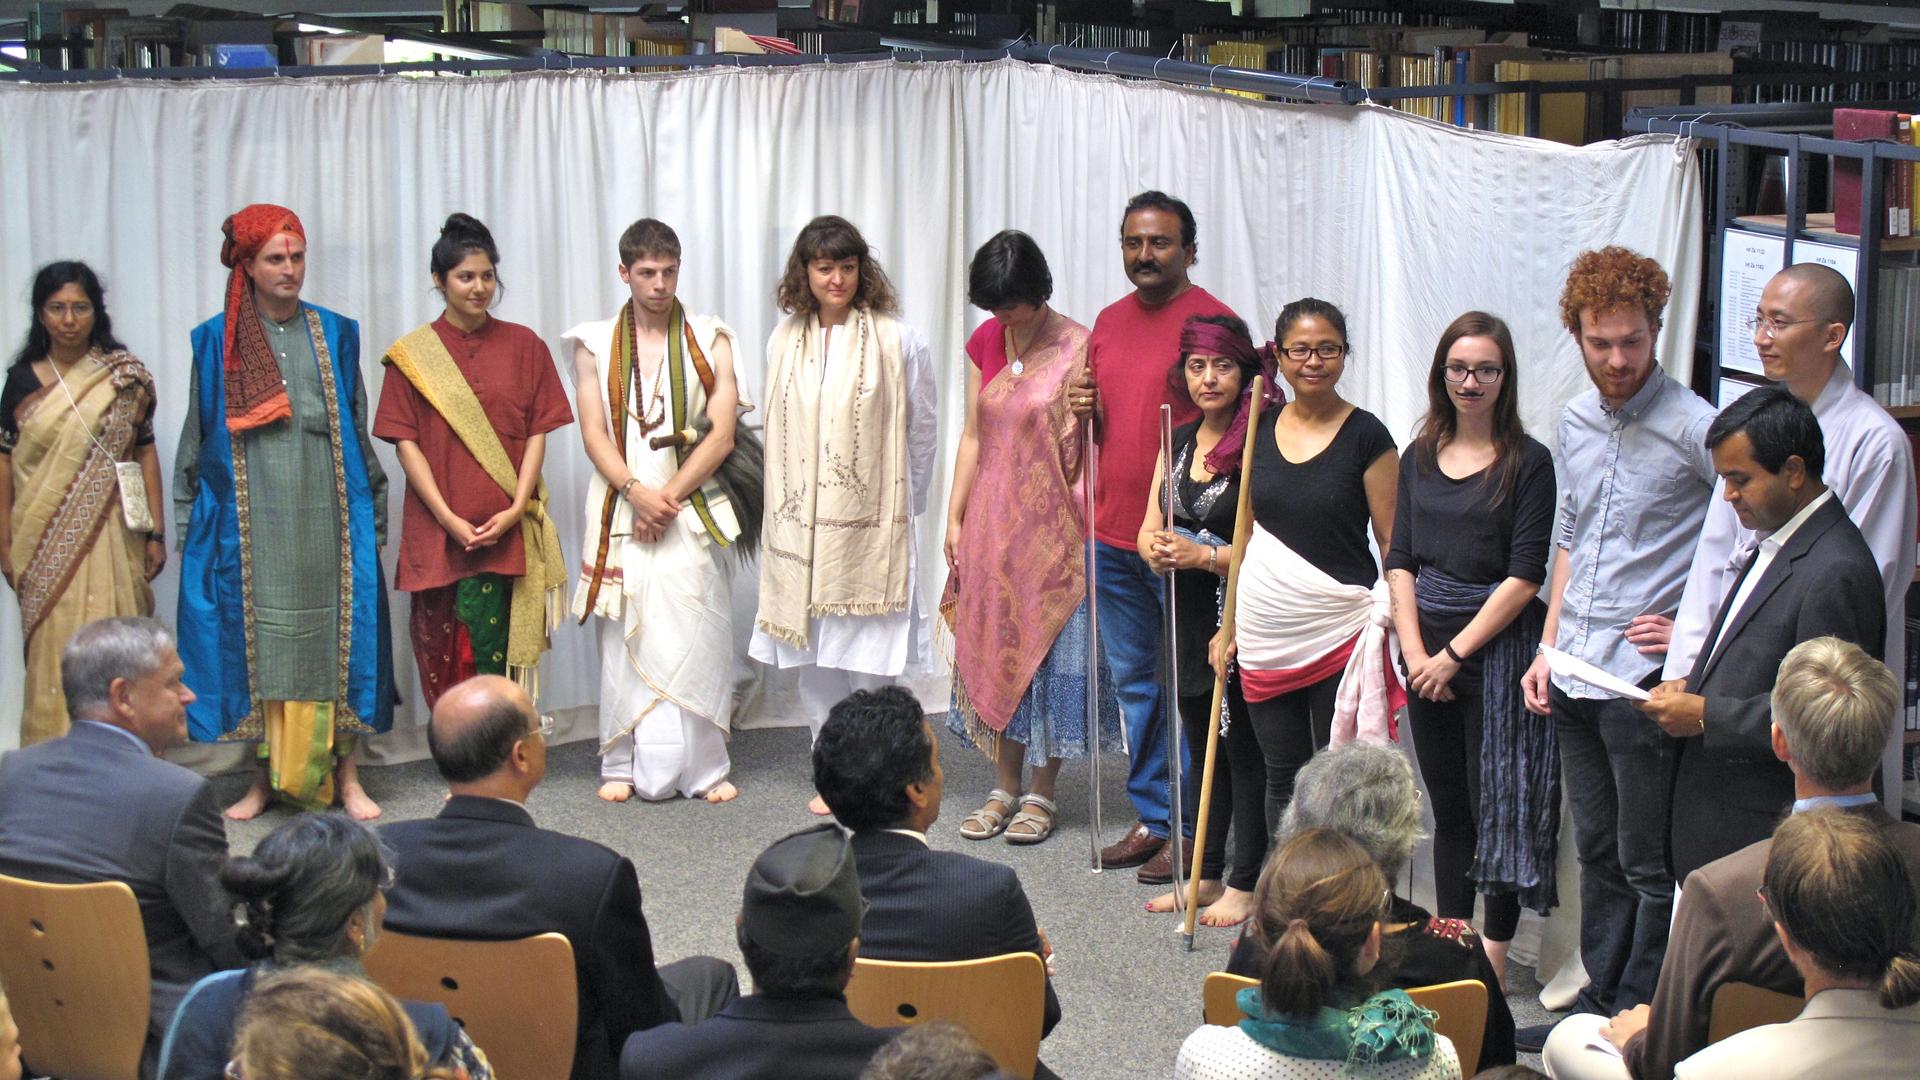 The cast of the Sanskrit play, "The Cleverness of the Thief." Patricia Sauthoff is in the center, wearing white.  